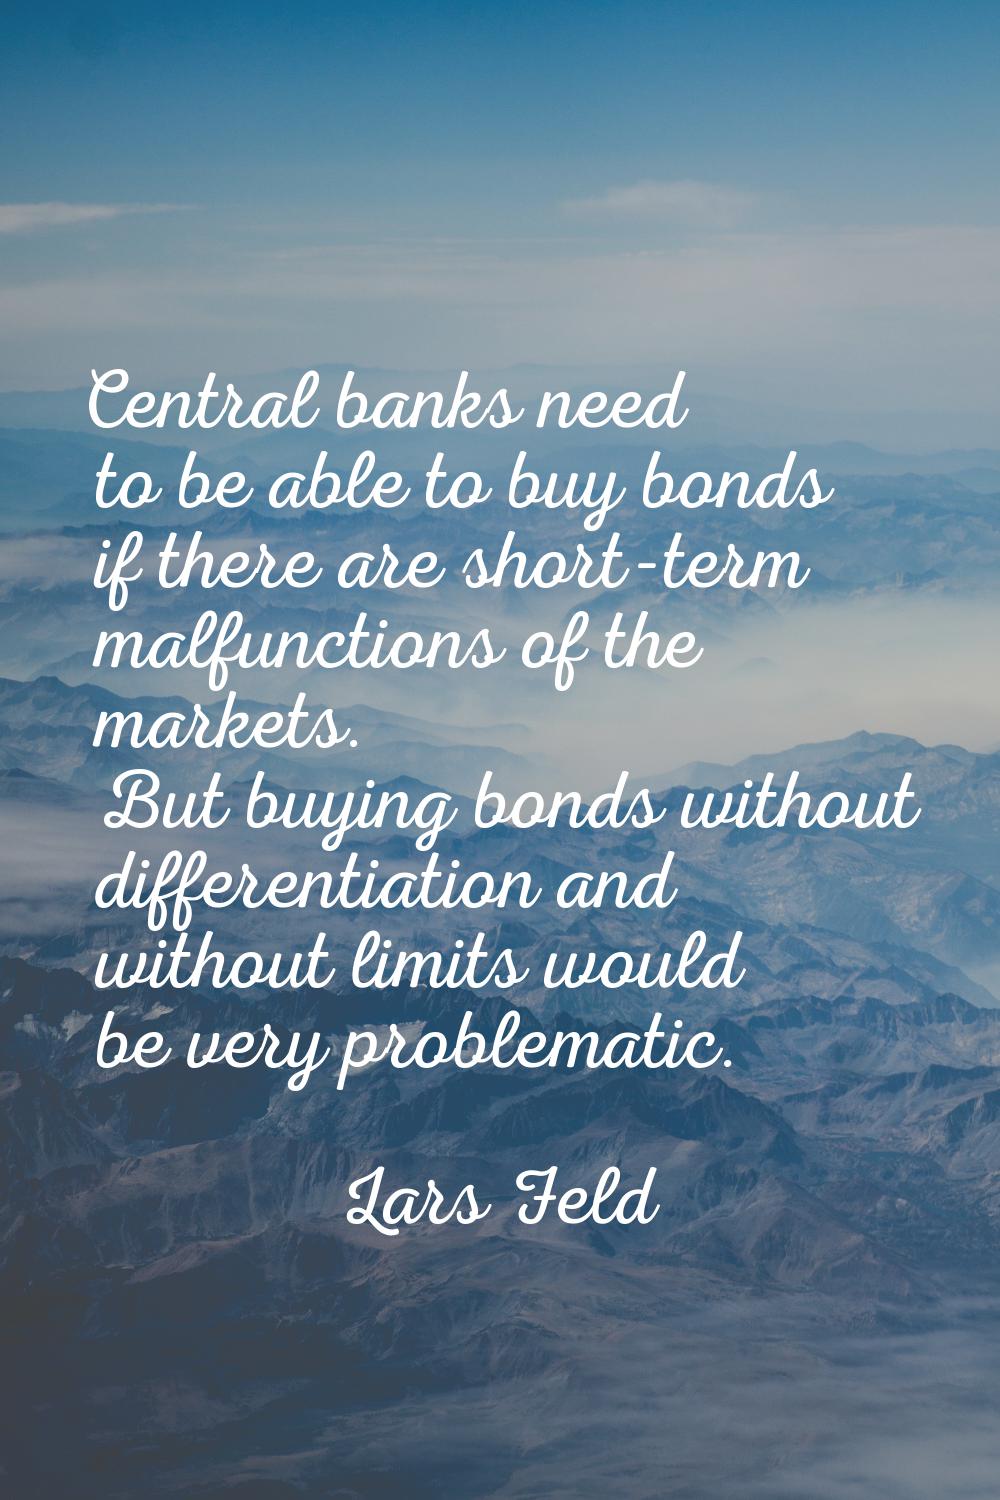 Central banks need to be able to buy bonds if there are short-term malfunctions of the markets. But